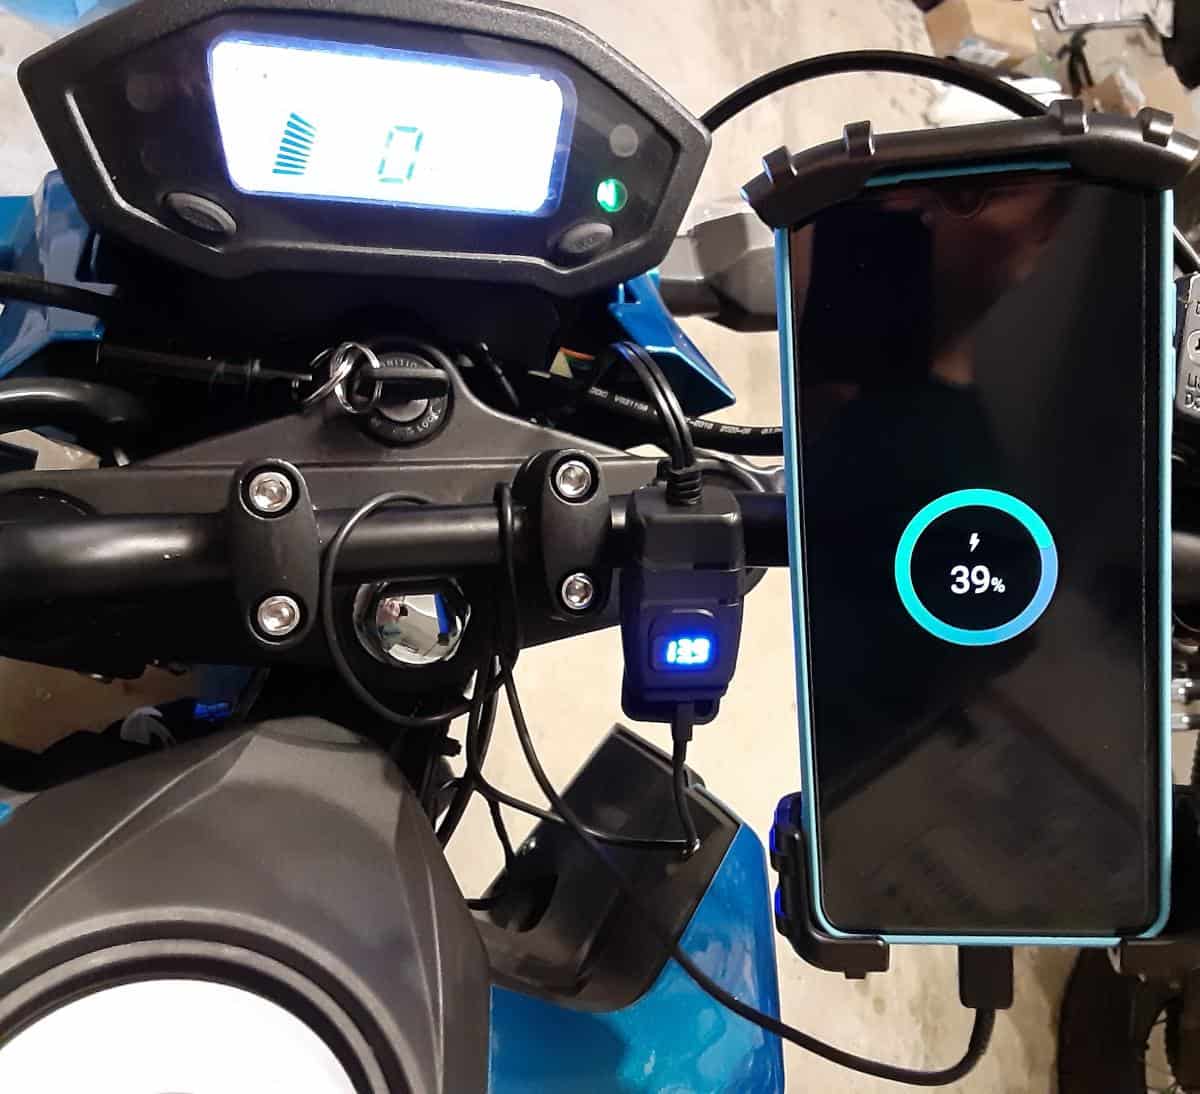 Boom Vader motorcycle with new USB cell phone charger installed.